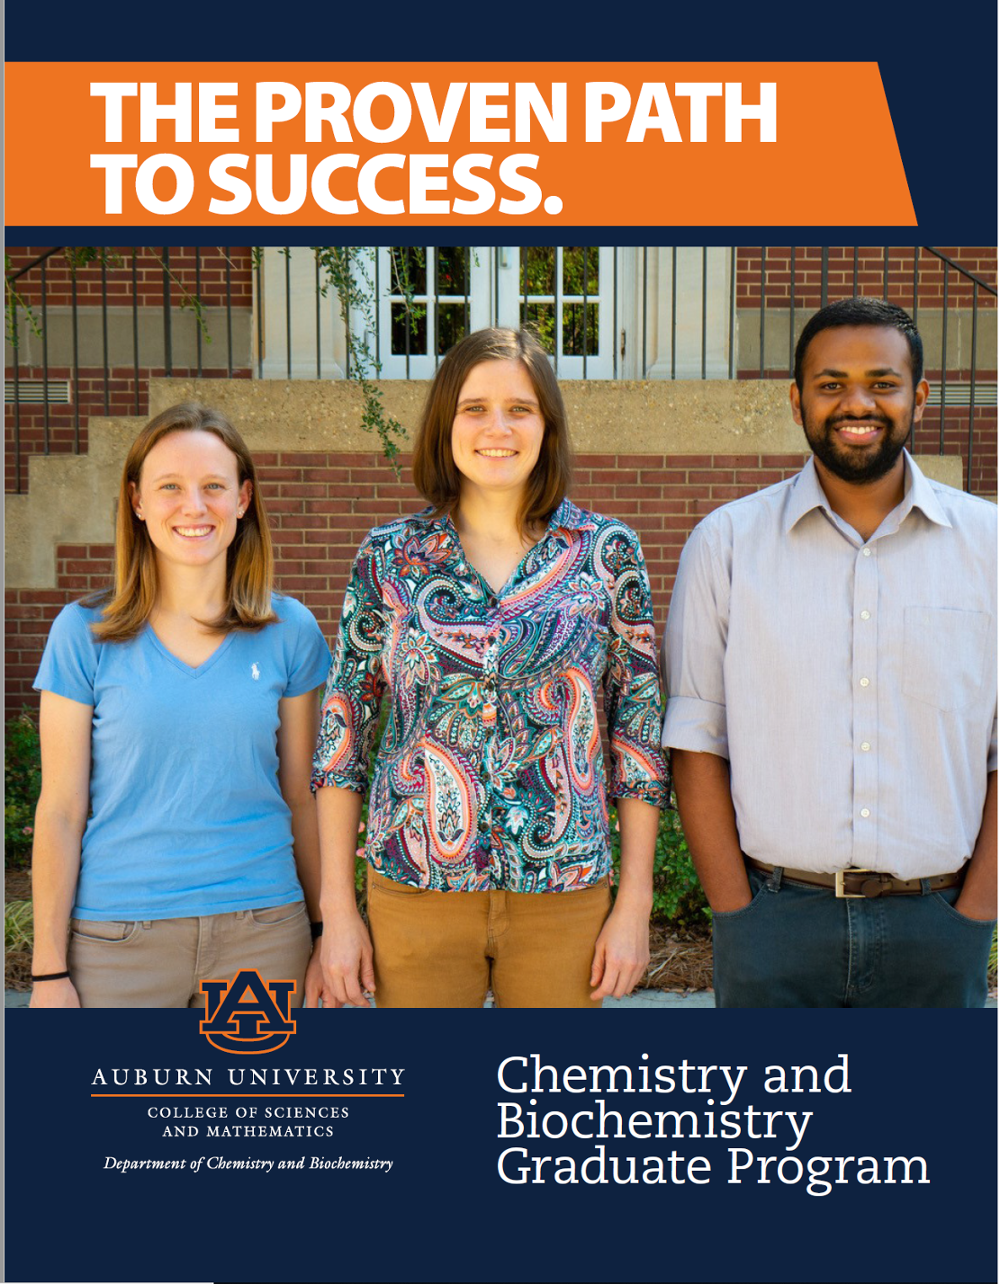 Monika Kodrycka (center) was featured on this year's graduate recruiting brochure for the Department of Chemistry and Biochemistry with two other graduate students, Alexandria (Alex) Bredar Combs (left) and Isuru Ariyarathna (right). 